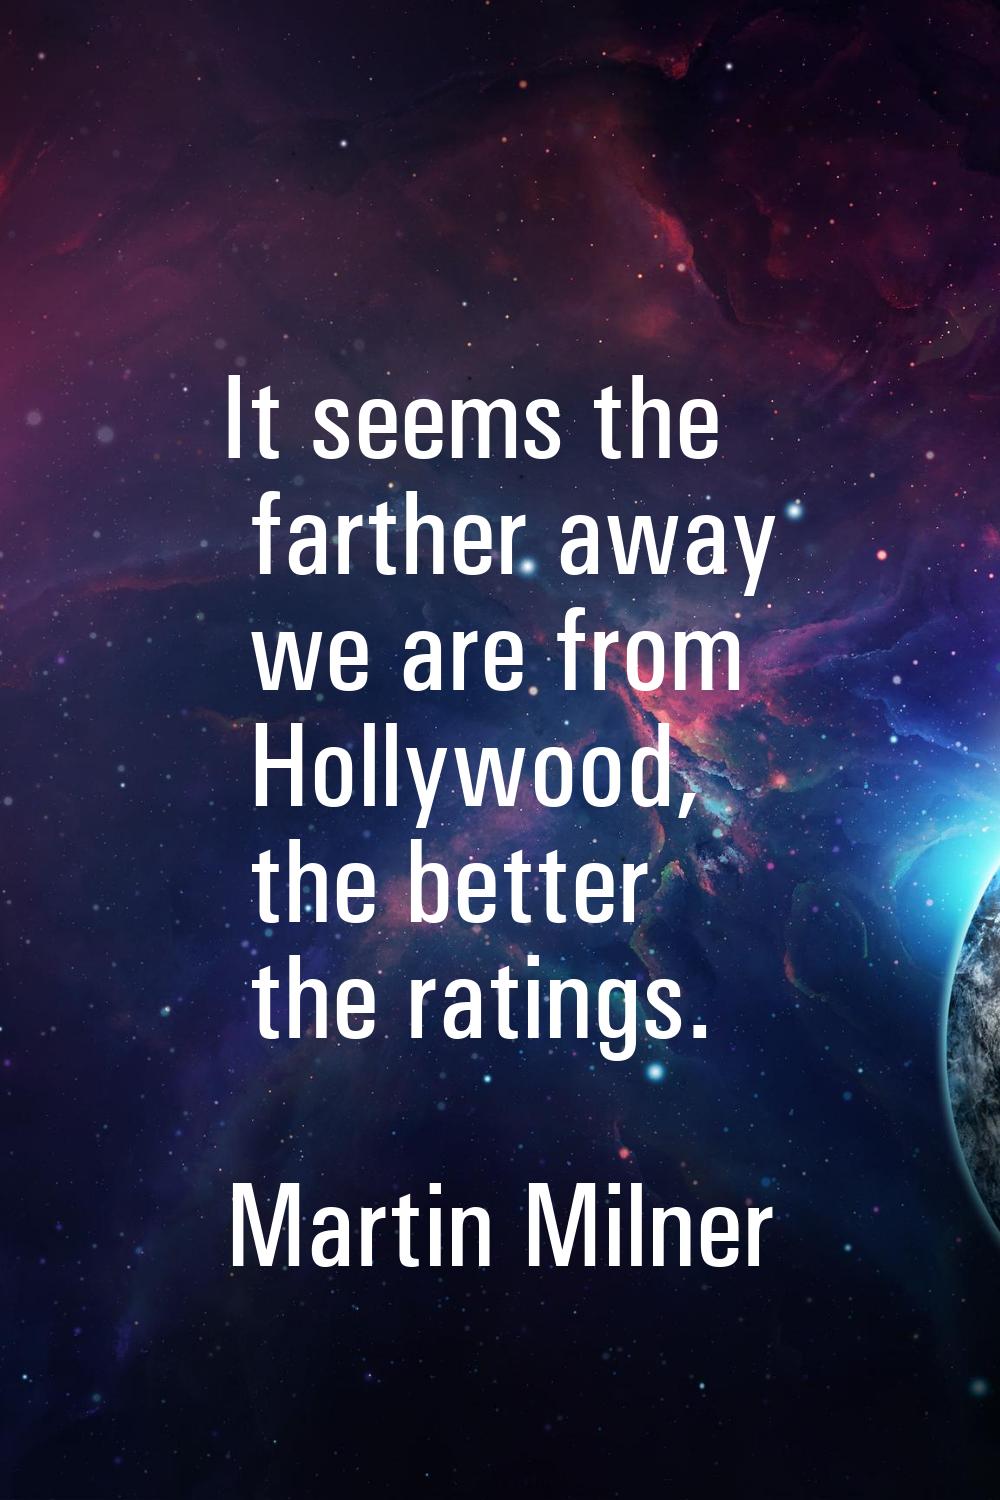 It seems the farther away we are from Hollywood, the better the ratings.